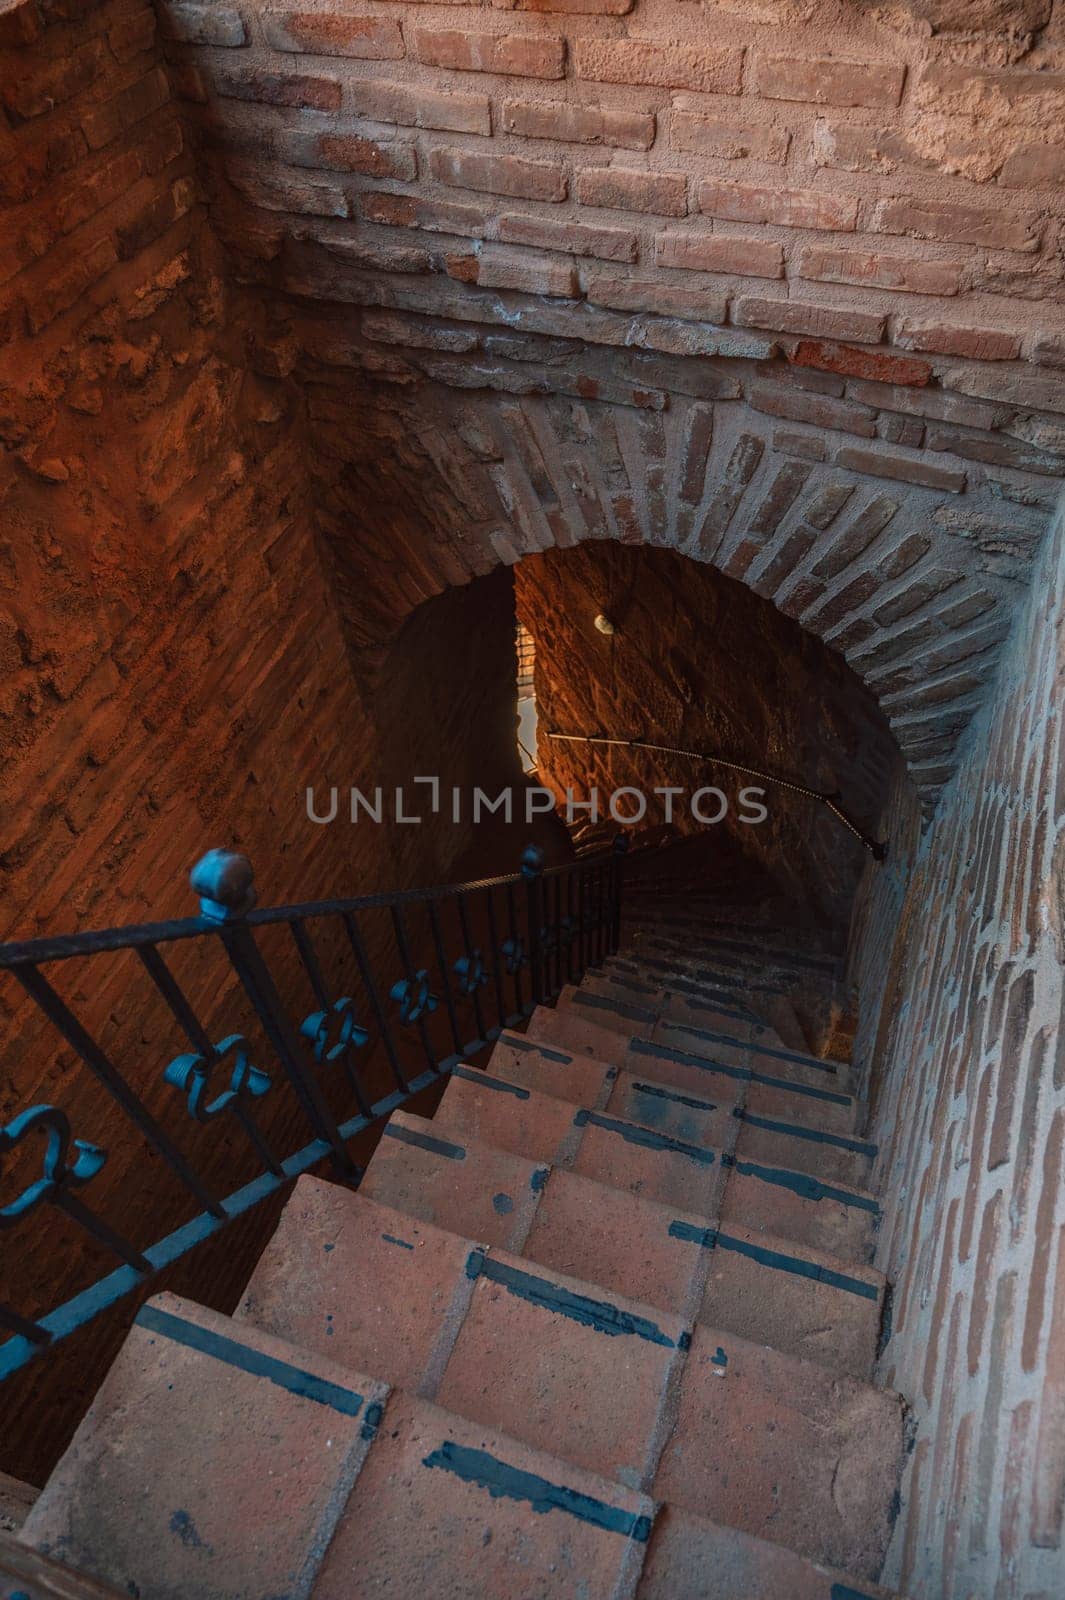 Upper part of the historical Red Tower Kizil Kule, in Alanya Castle by rusak